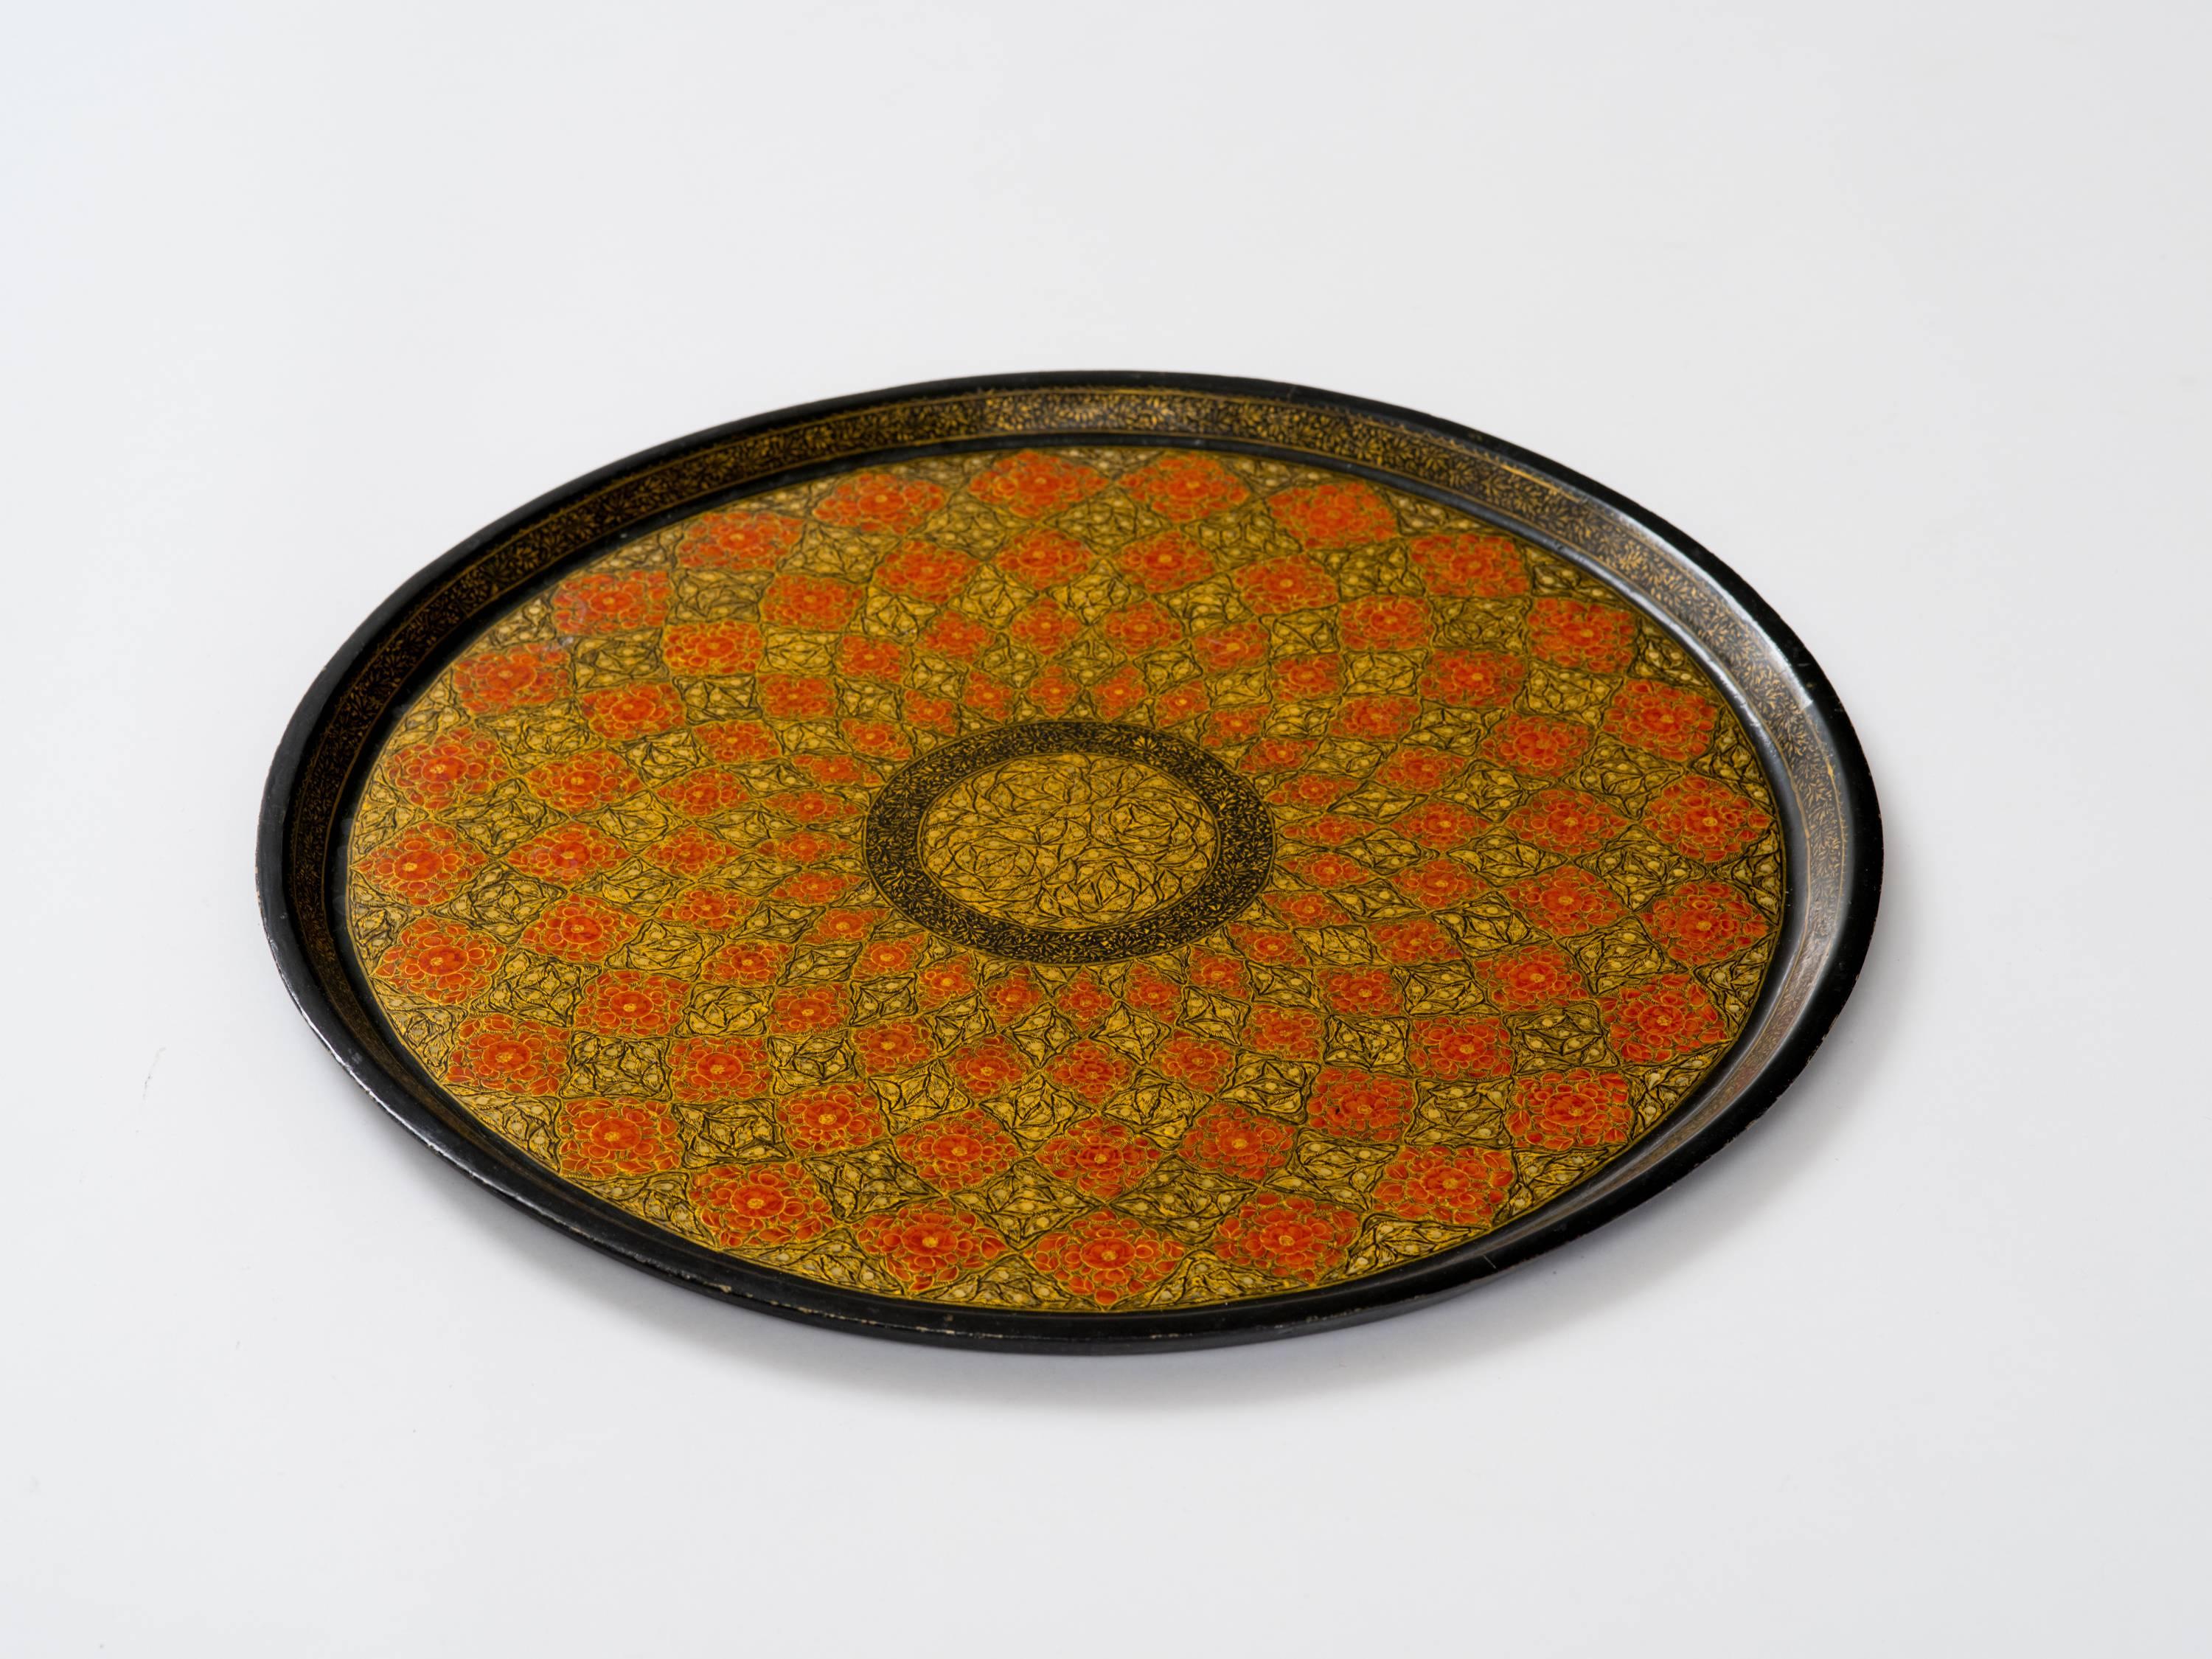 Finely detailed Kashmiri hand-painted and lacquered serving tray in traditional Mughal design, India, circa 1960s.